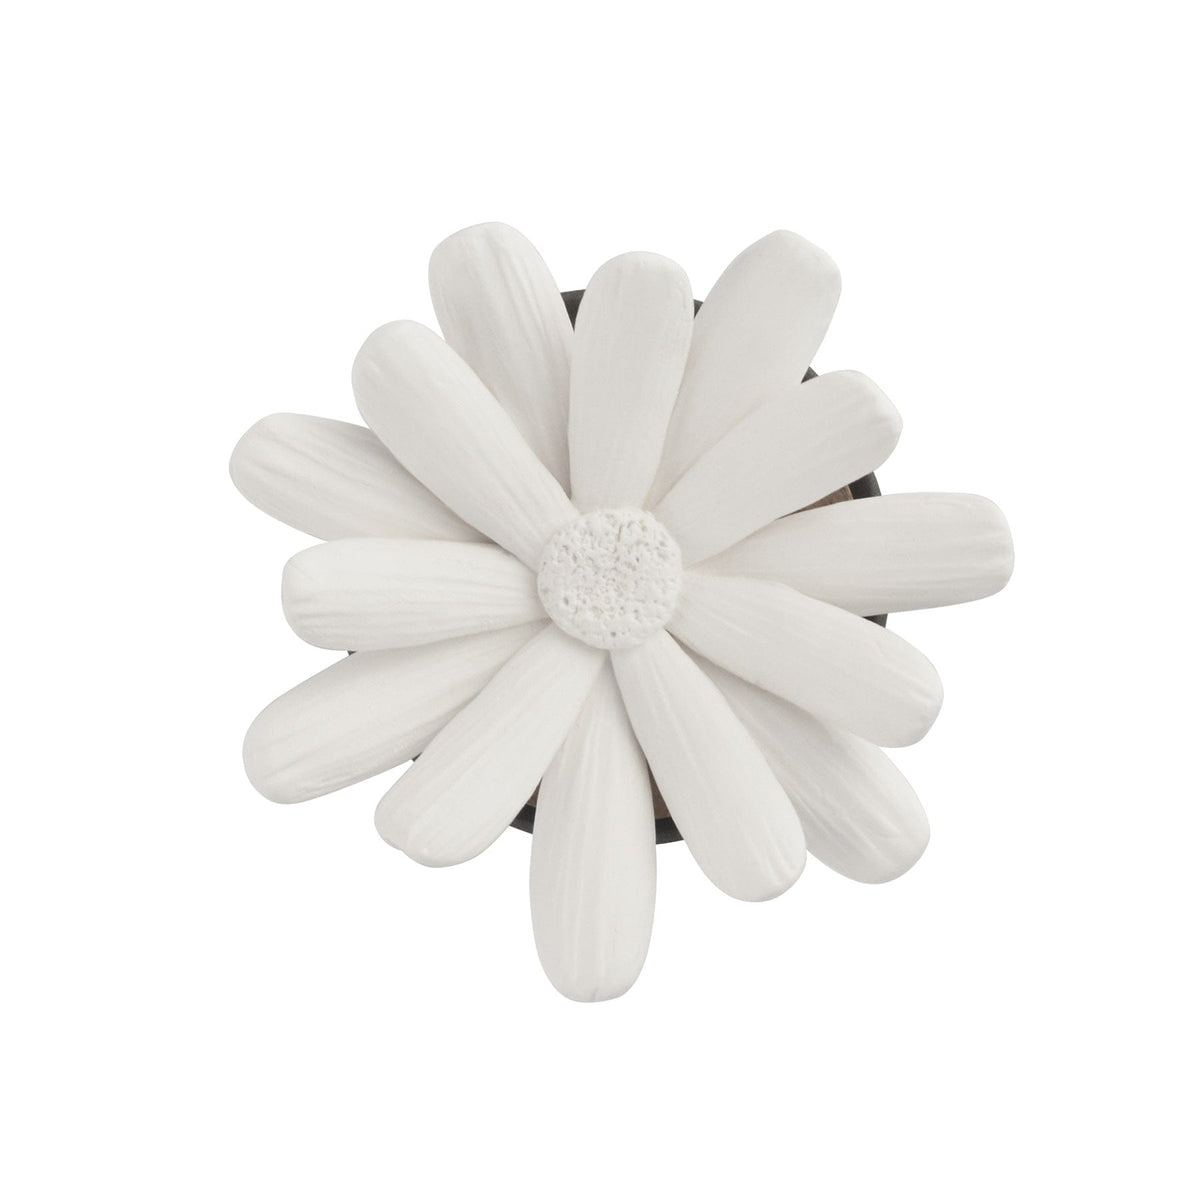 Bloomster Pot Clay Diffuser Daisy - Hysses Singapore